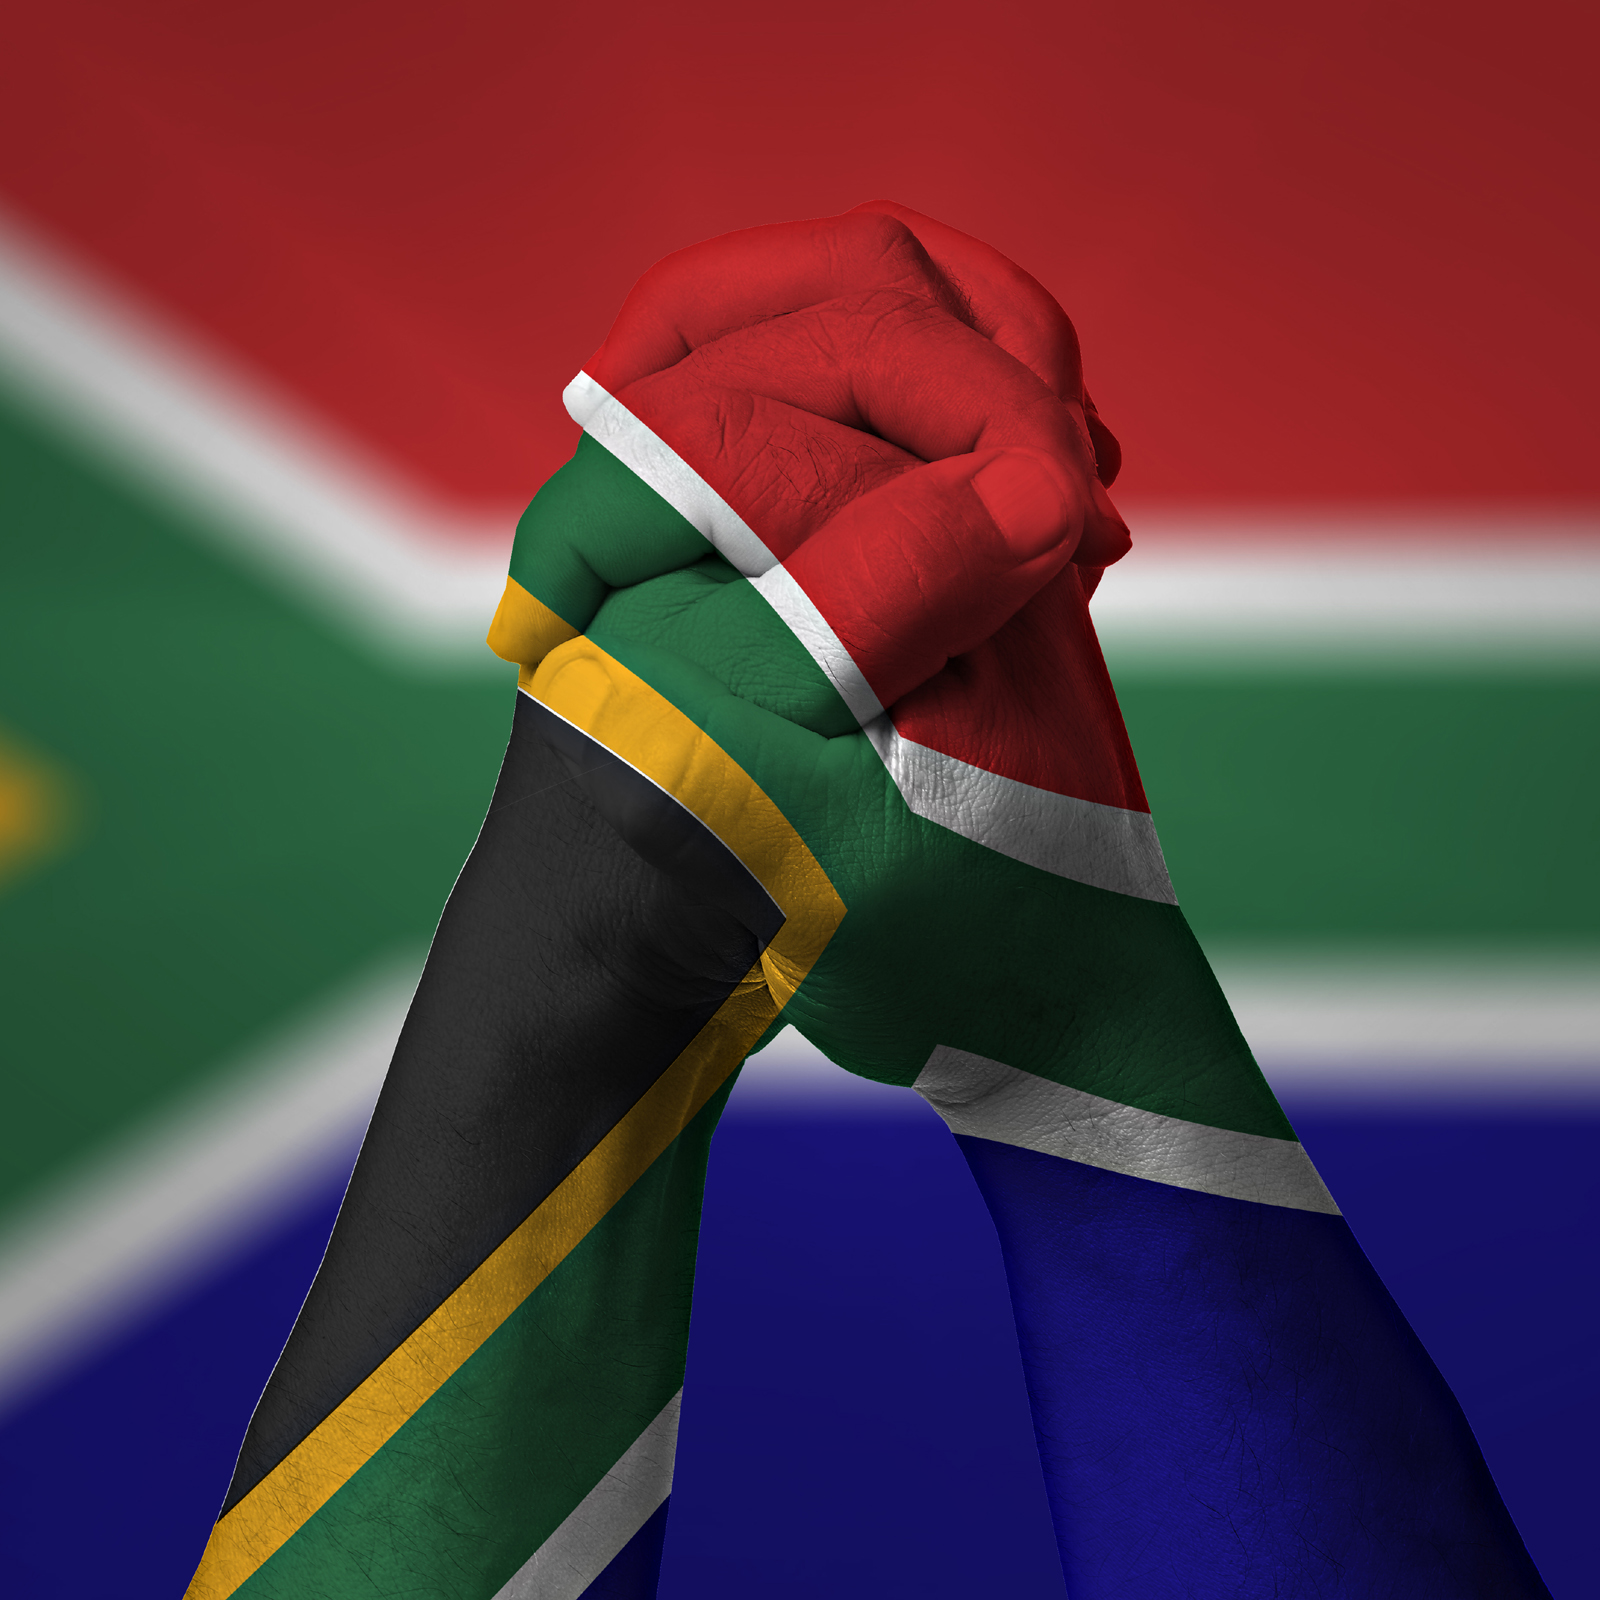 Crypto Self-Regulation Deemed a Likely Solution in South Africa